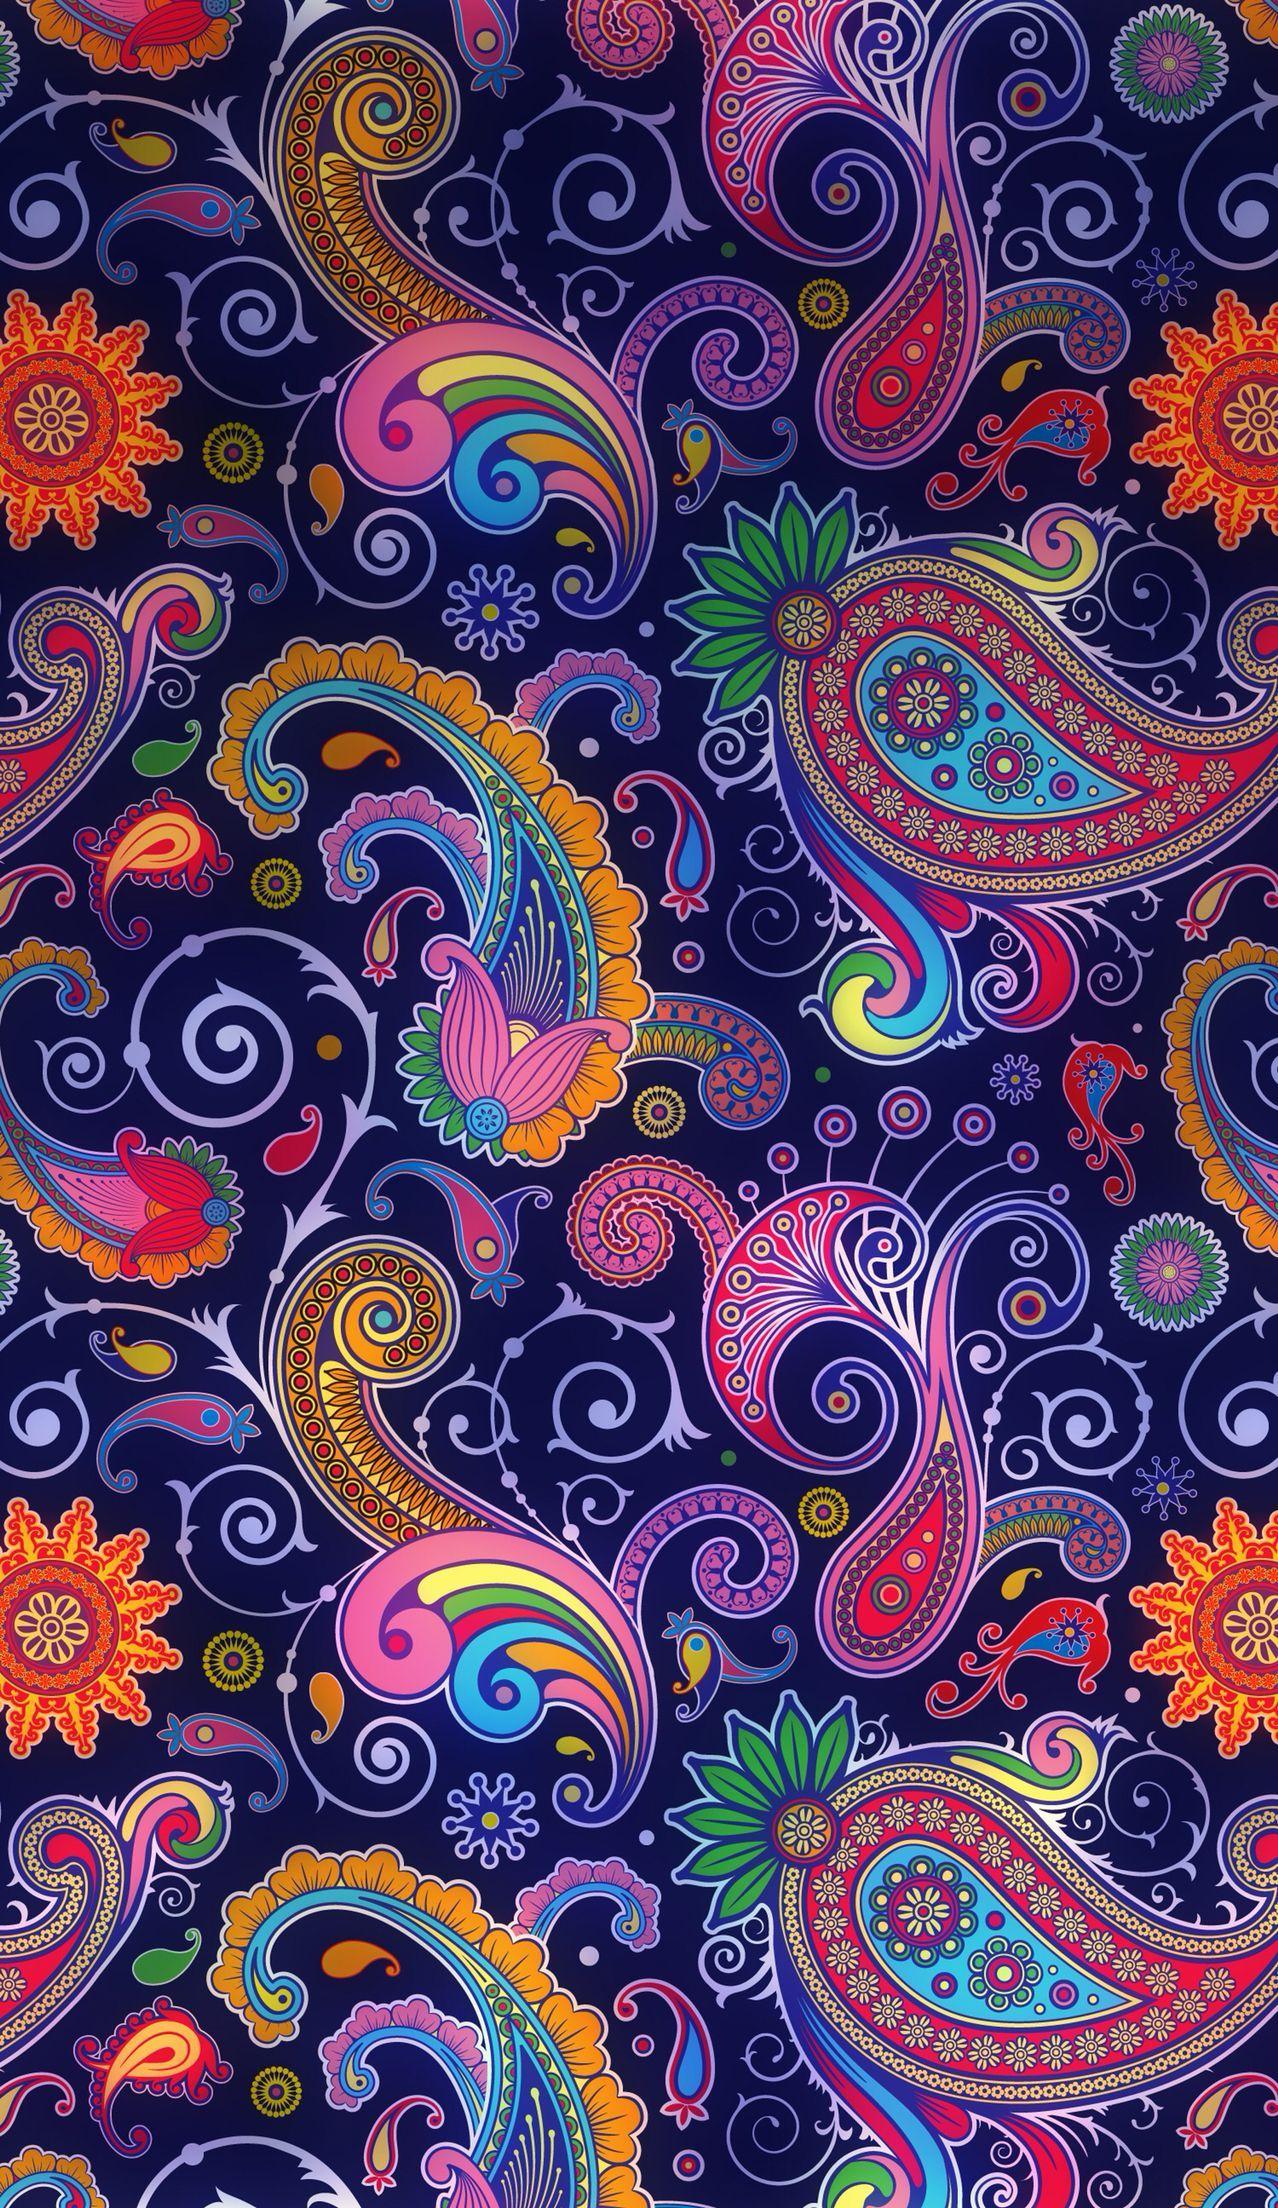 Paisley Iphone Wallpapers Top Free Paisley Iphone Backgrounds Wallpaperaccess 4029